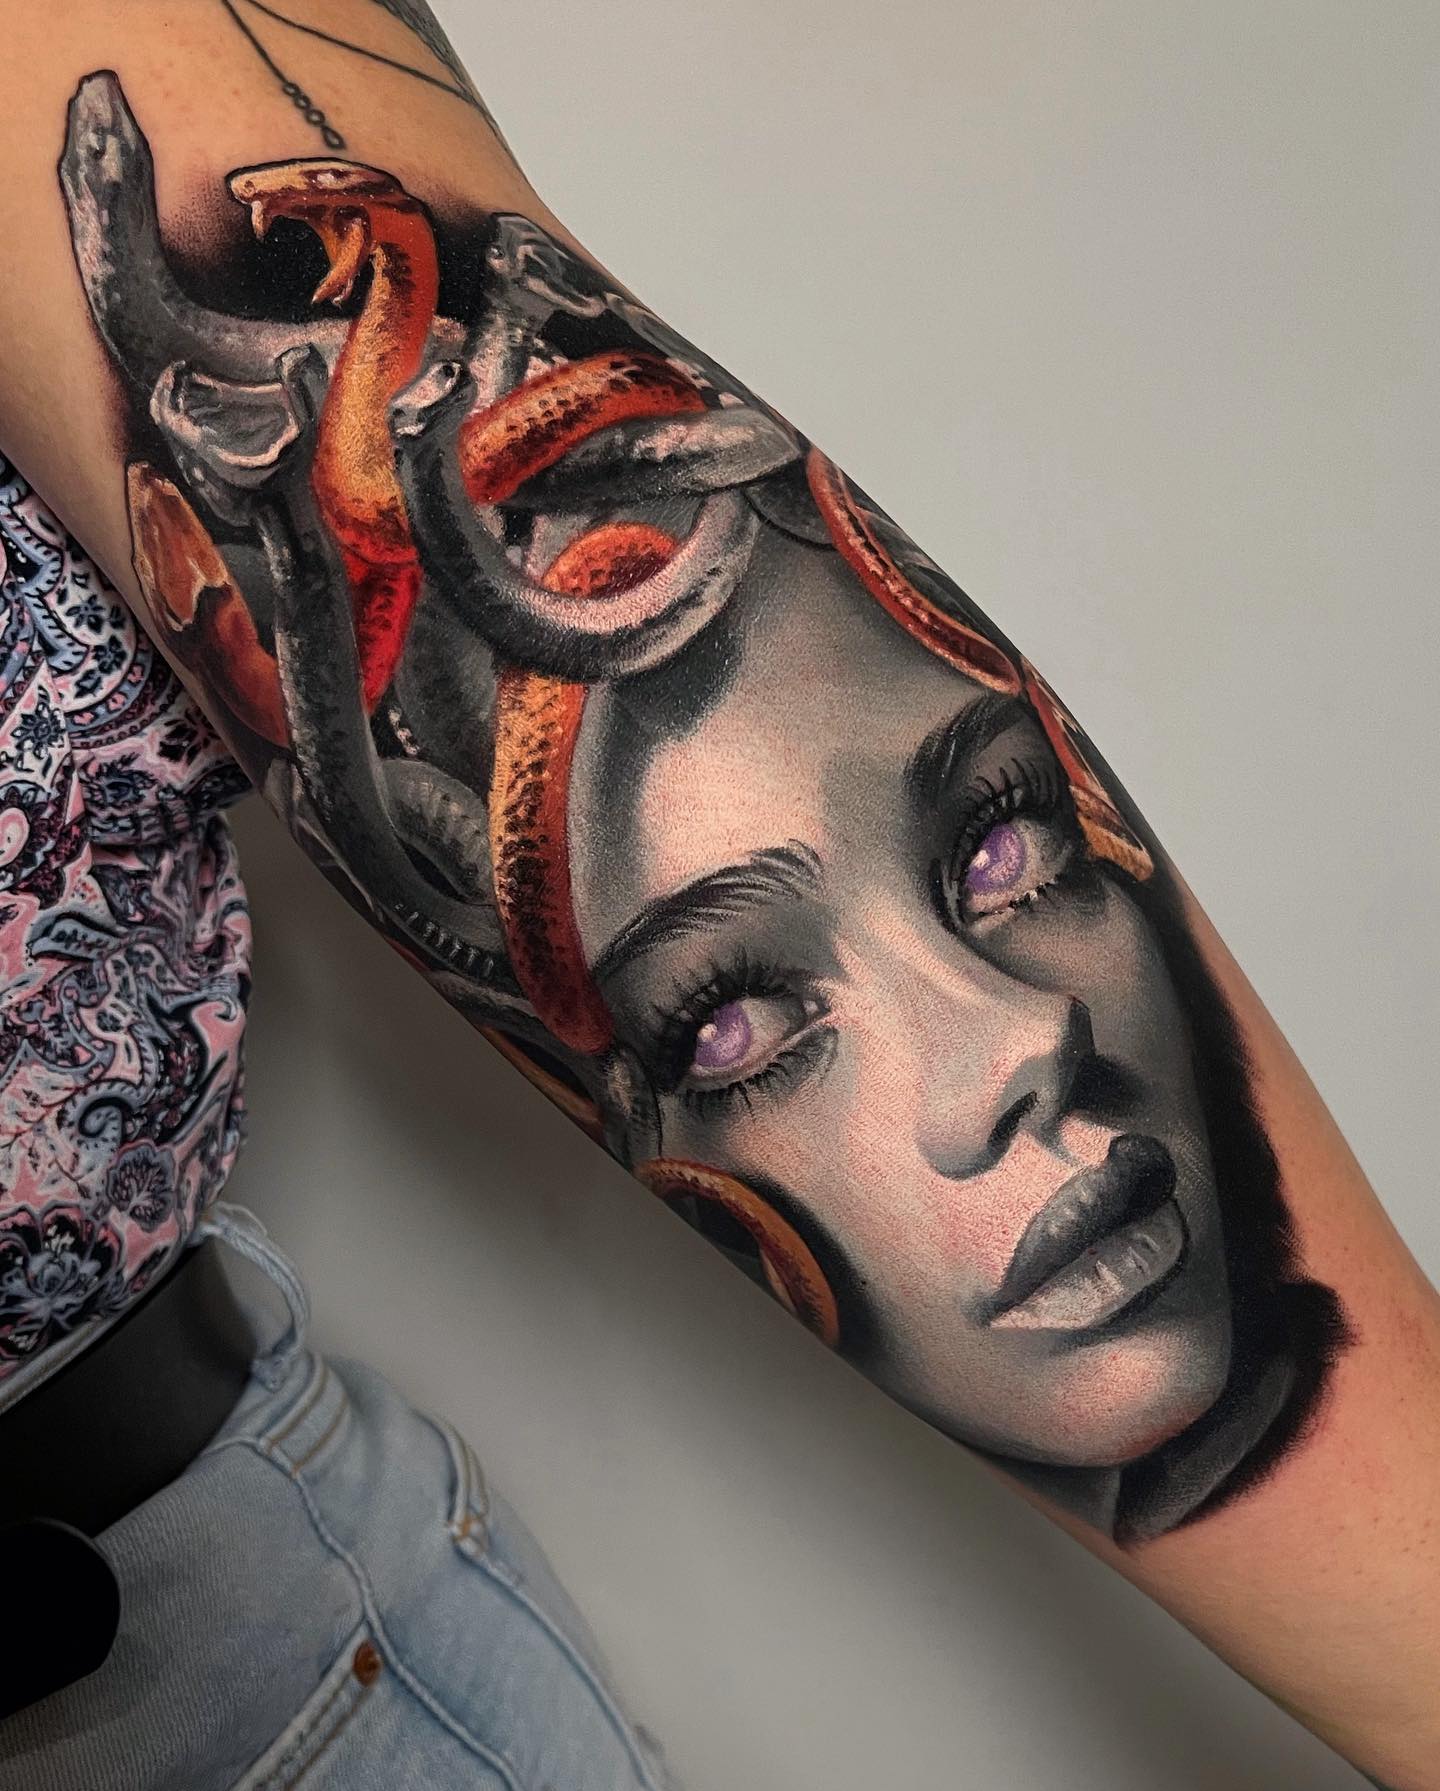 To create a detailed tattoo like this, tattoo artists spend a lot of time and as we can see above, it totally worths it! Grey-faced Medusa has purple eyes, which are the symbols of strength. This realistic tattoo will show everyone that you have a good taste.